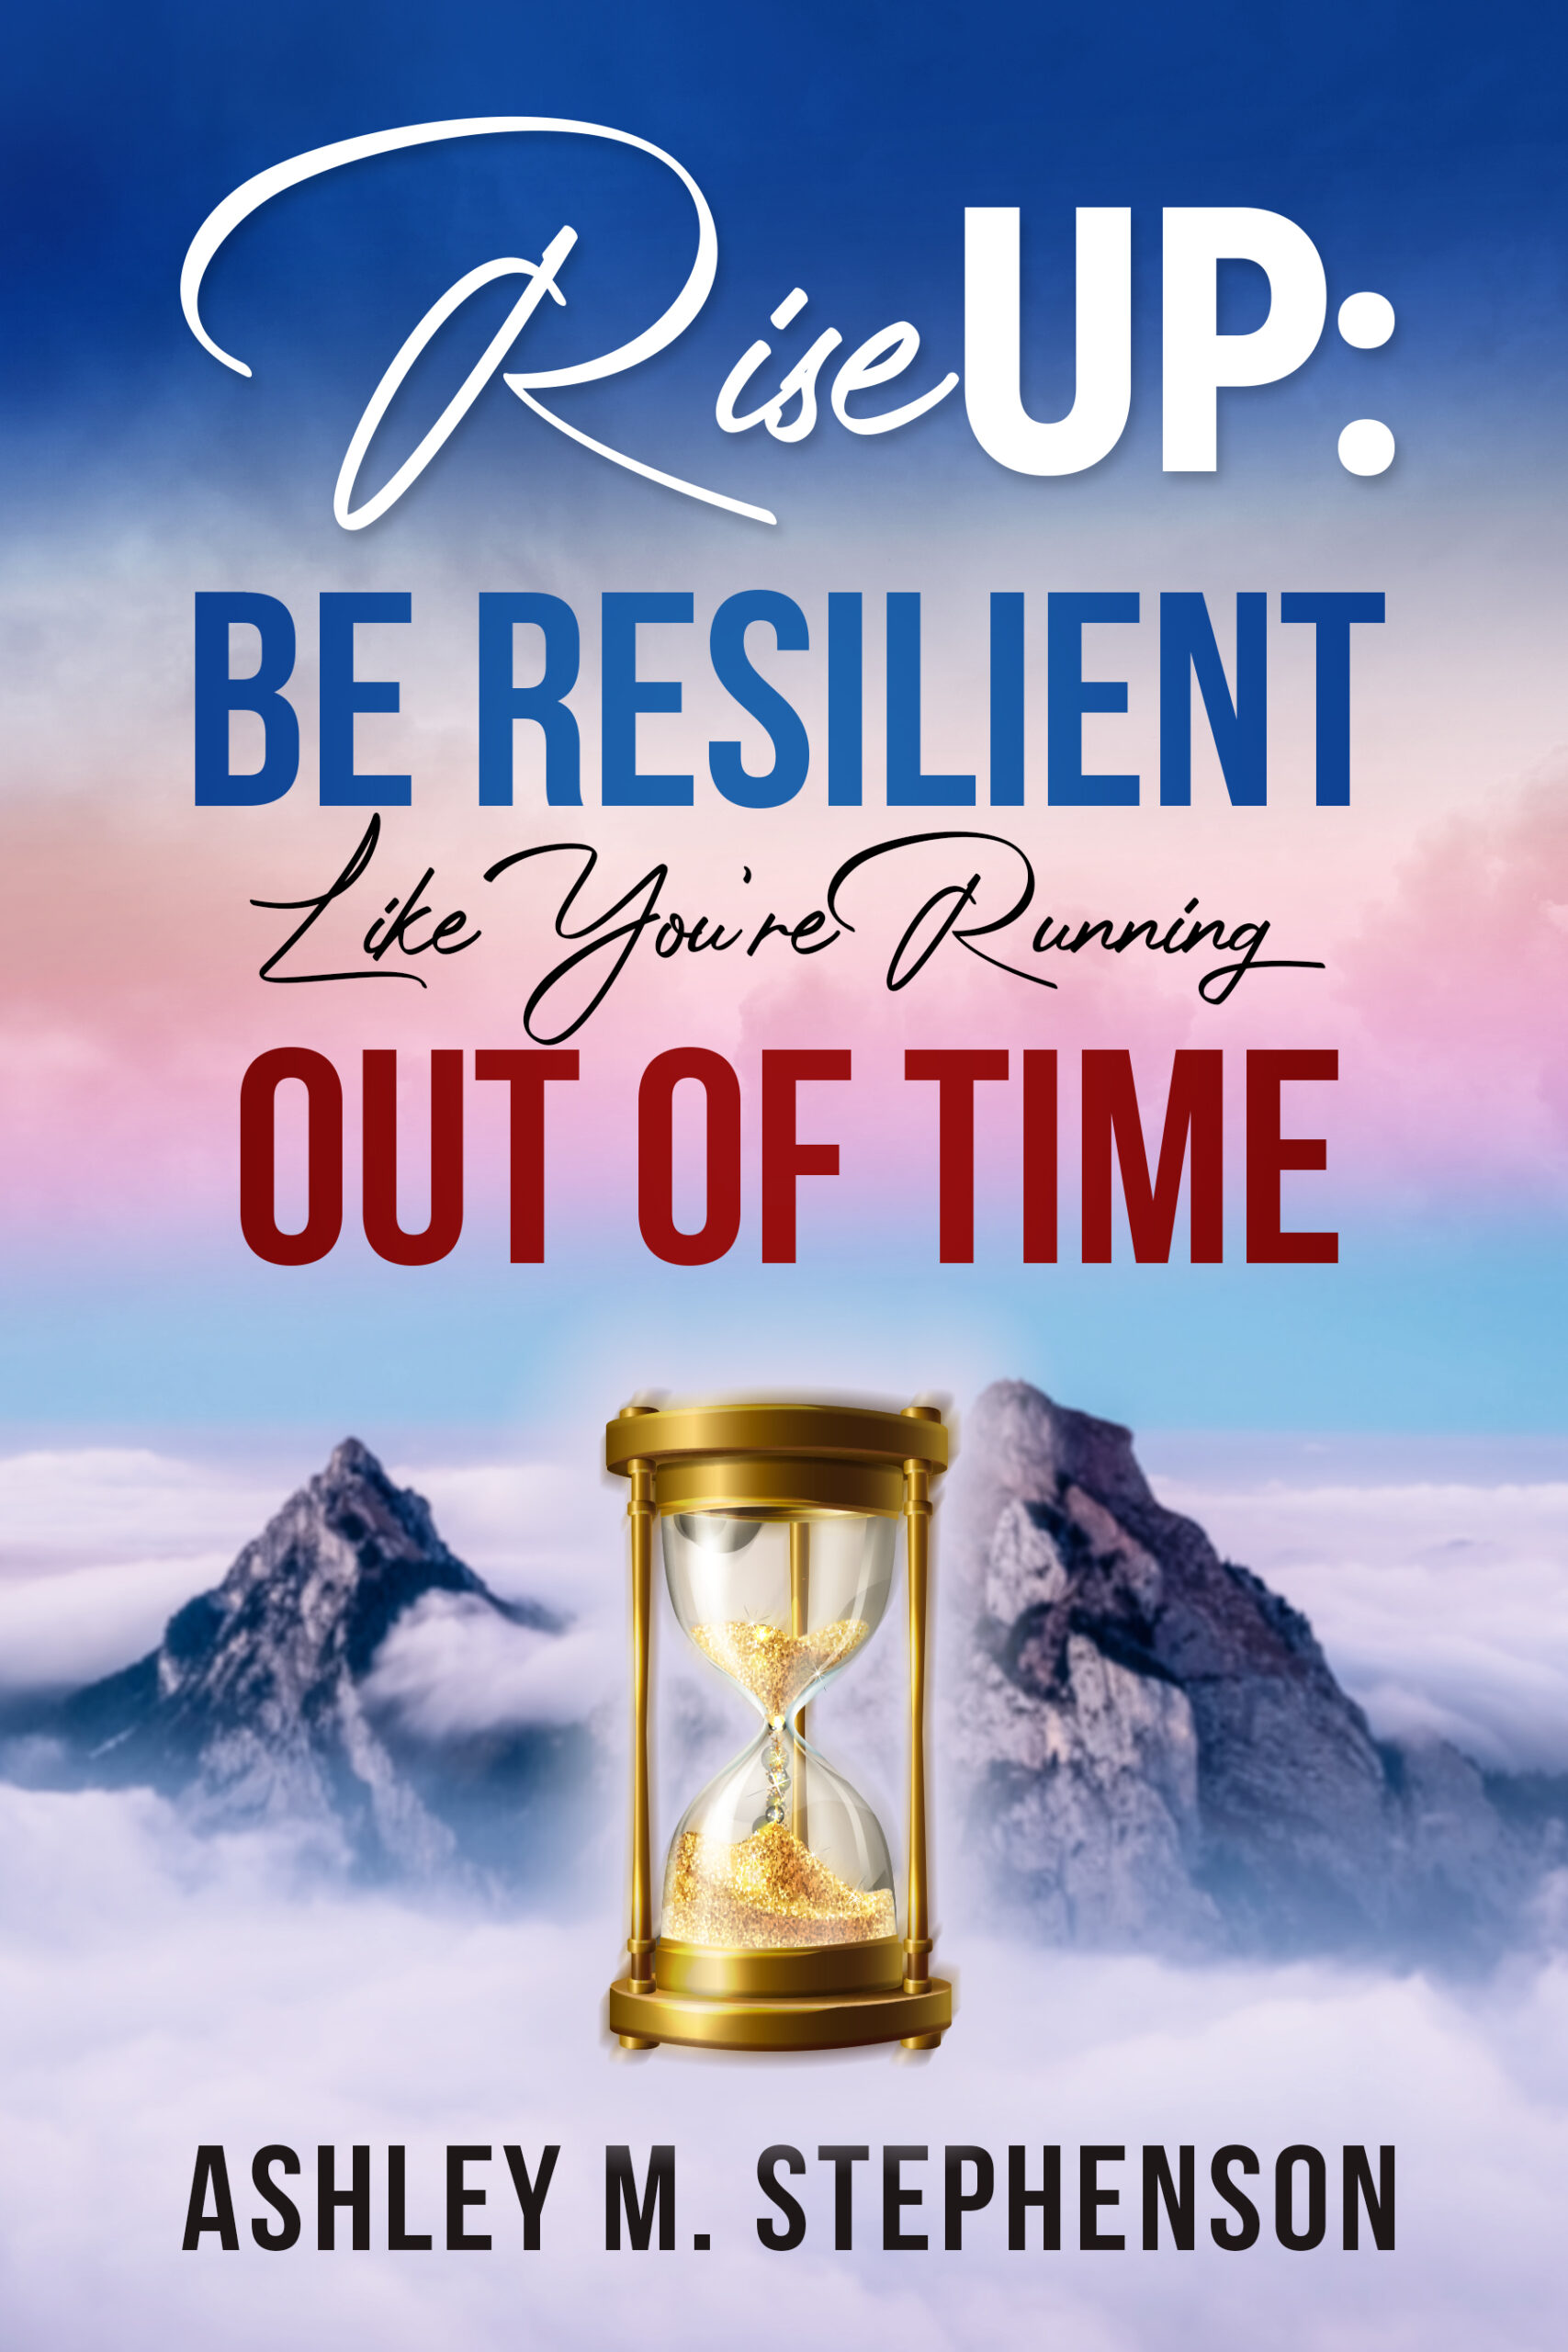 FREE: Rise Up: Be Resilient Like You’re Running Out of Time by Ashley M. Stephenson